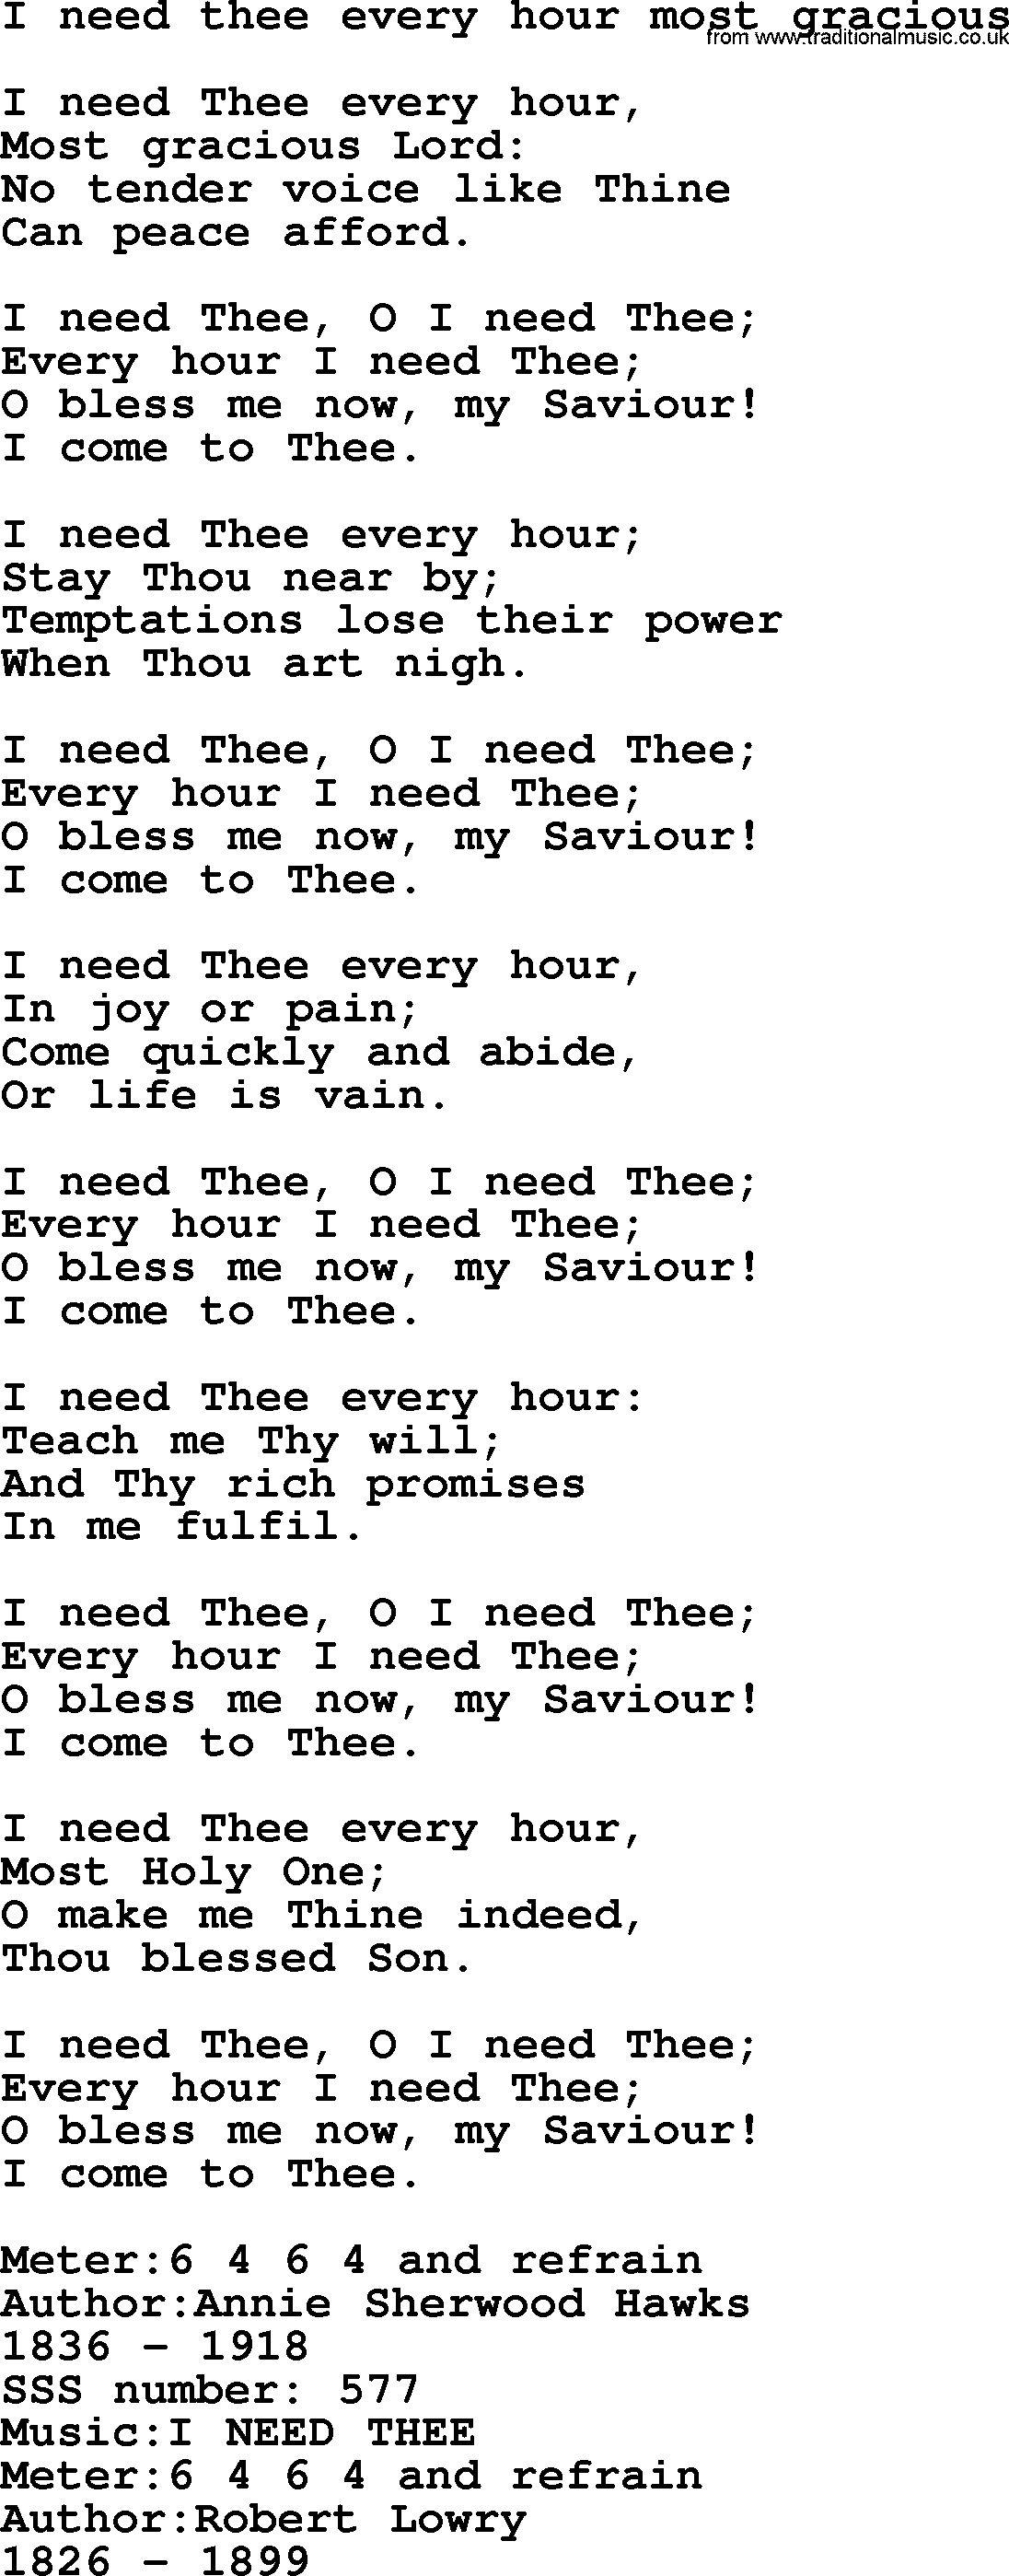 Sacred Songs and Solos complete, 1200 Hymns, title: I Need Thee Every Hour Most Gracious, lyrics and PDF